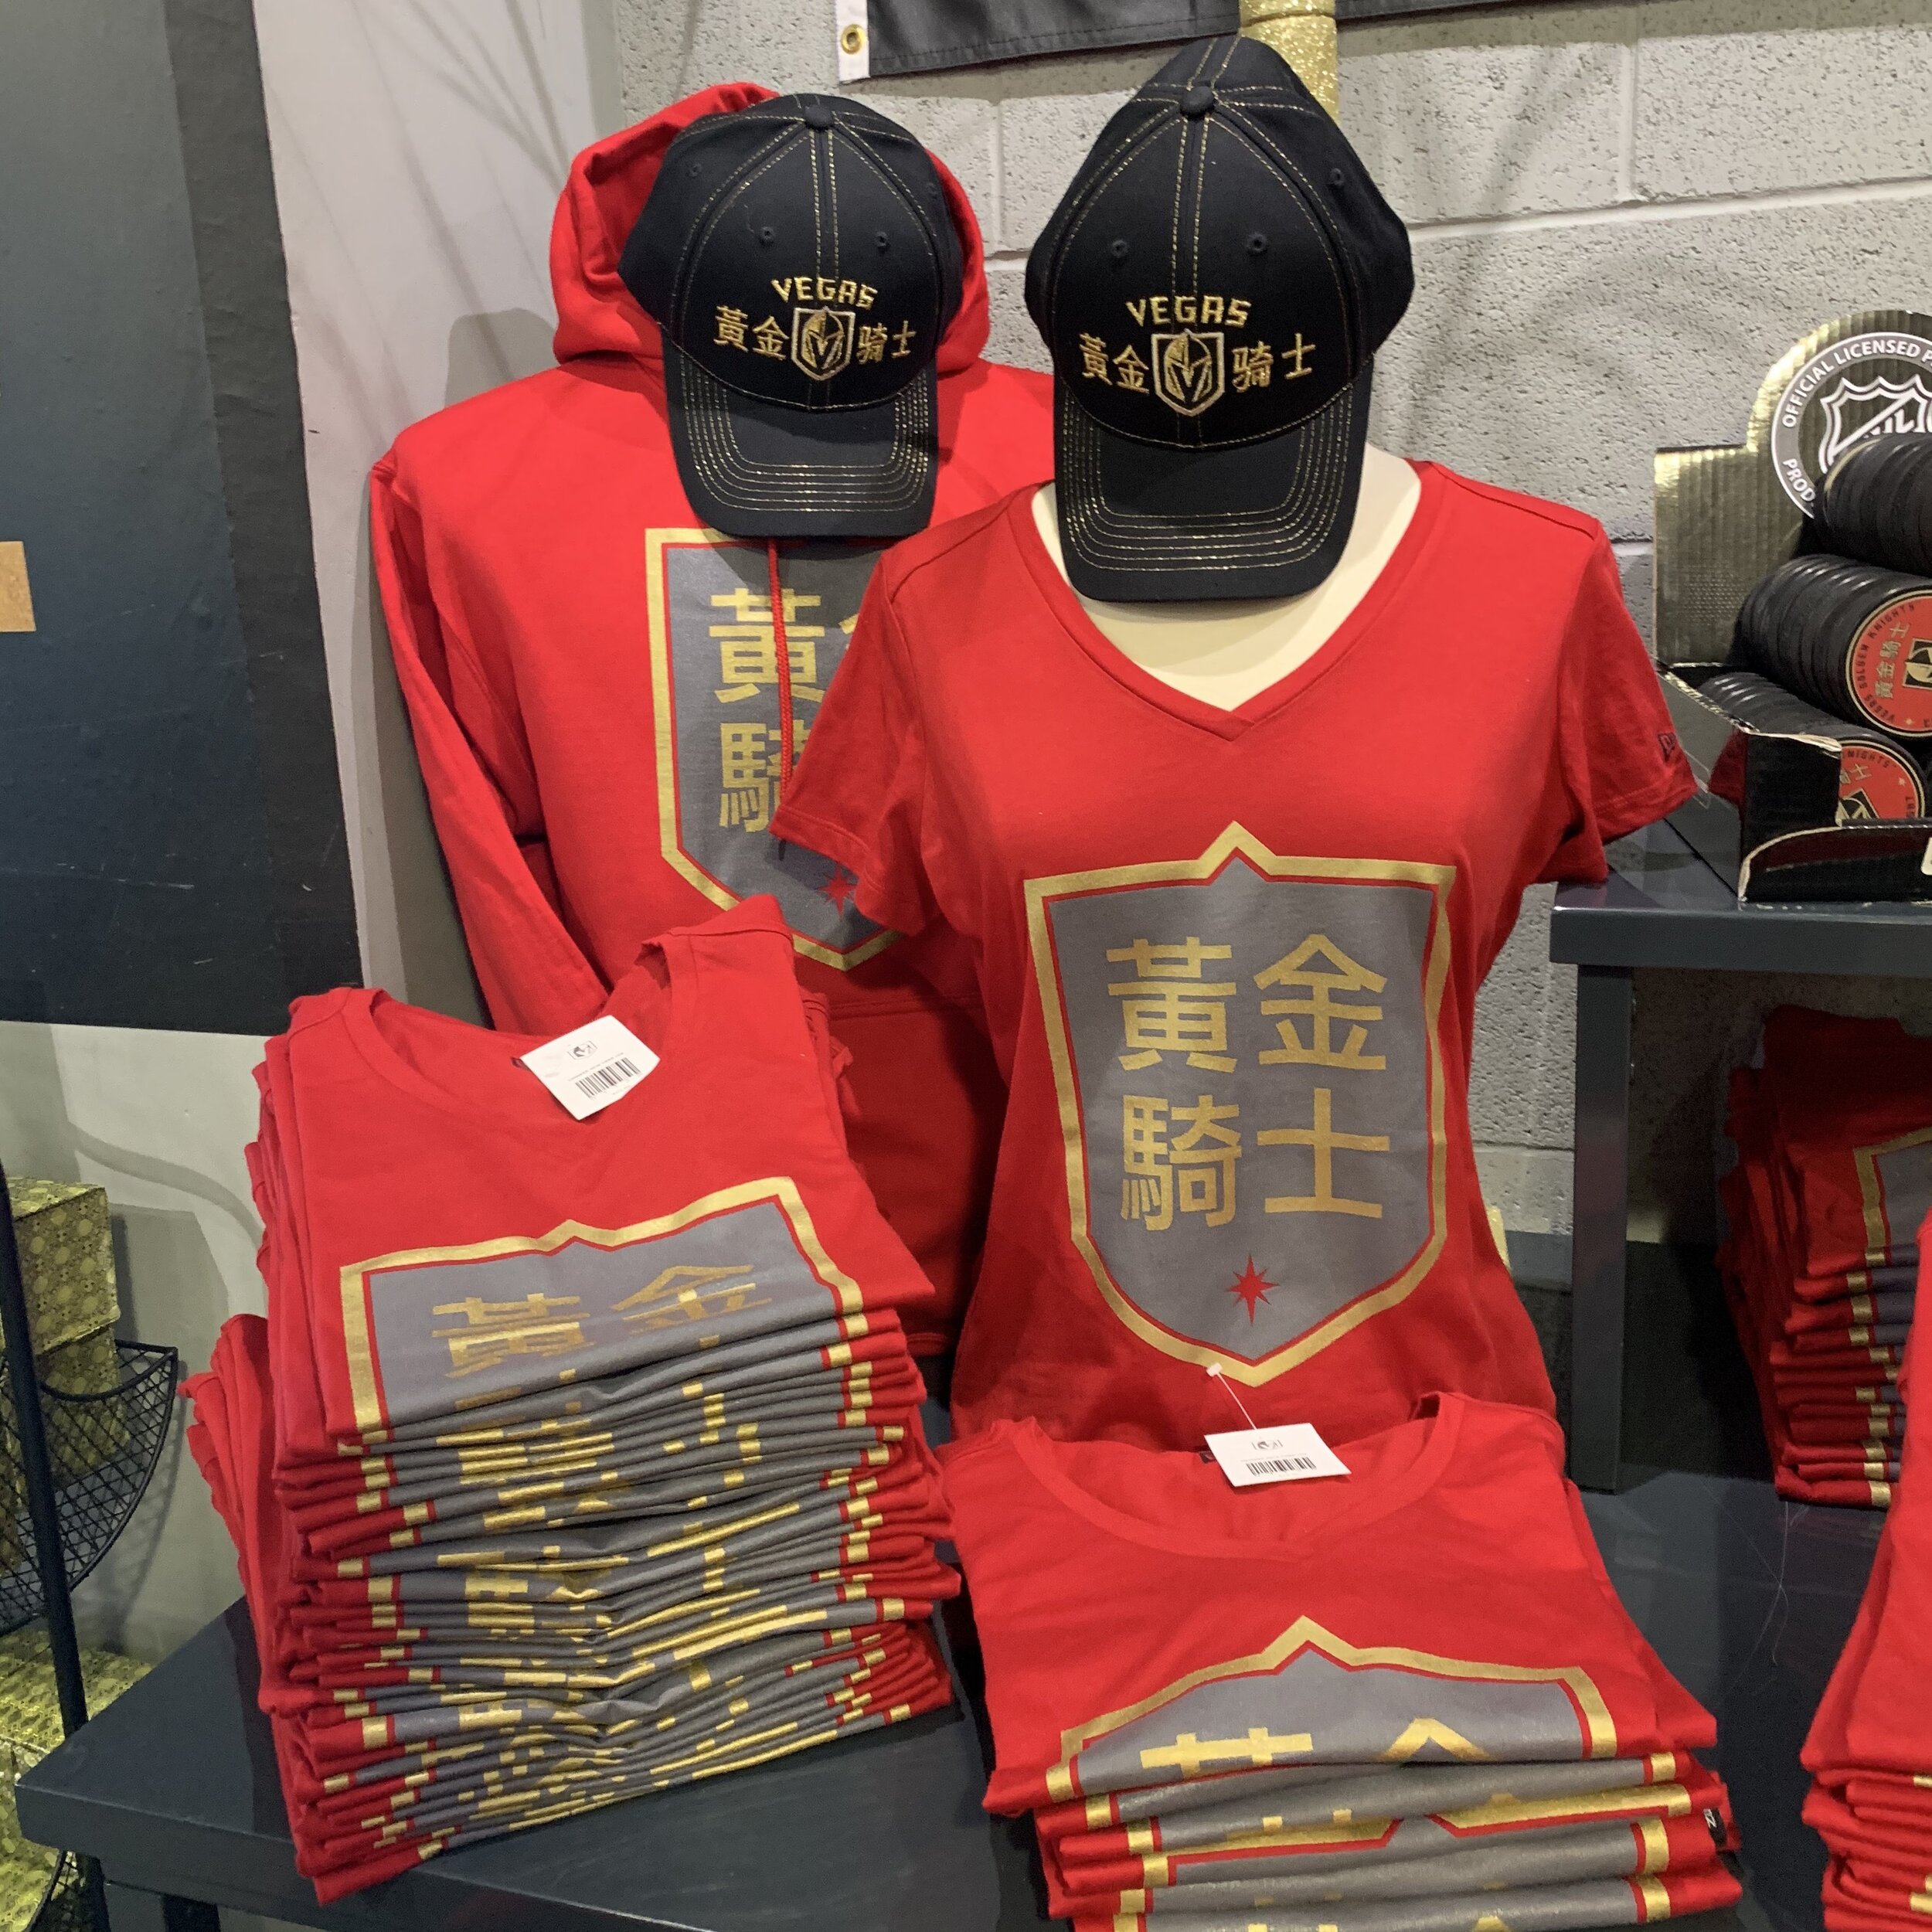 Vegas Golden Knights celebrate Chinese New Year with special jerseys,  themed gear